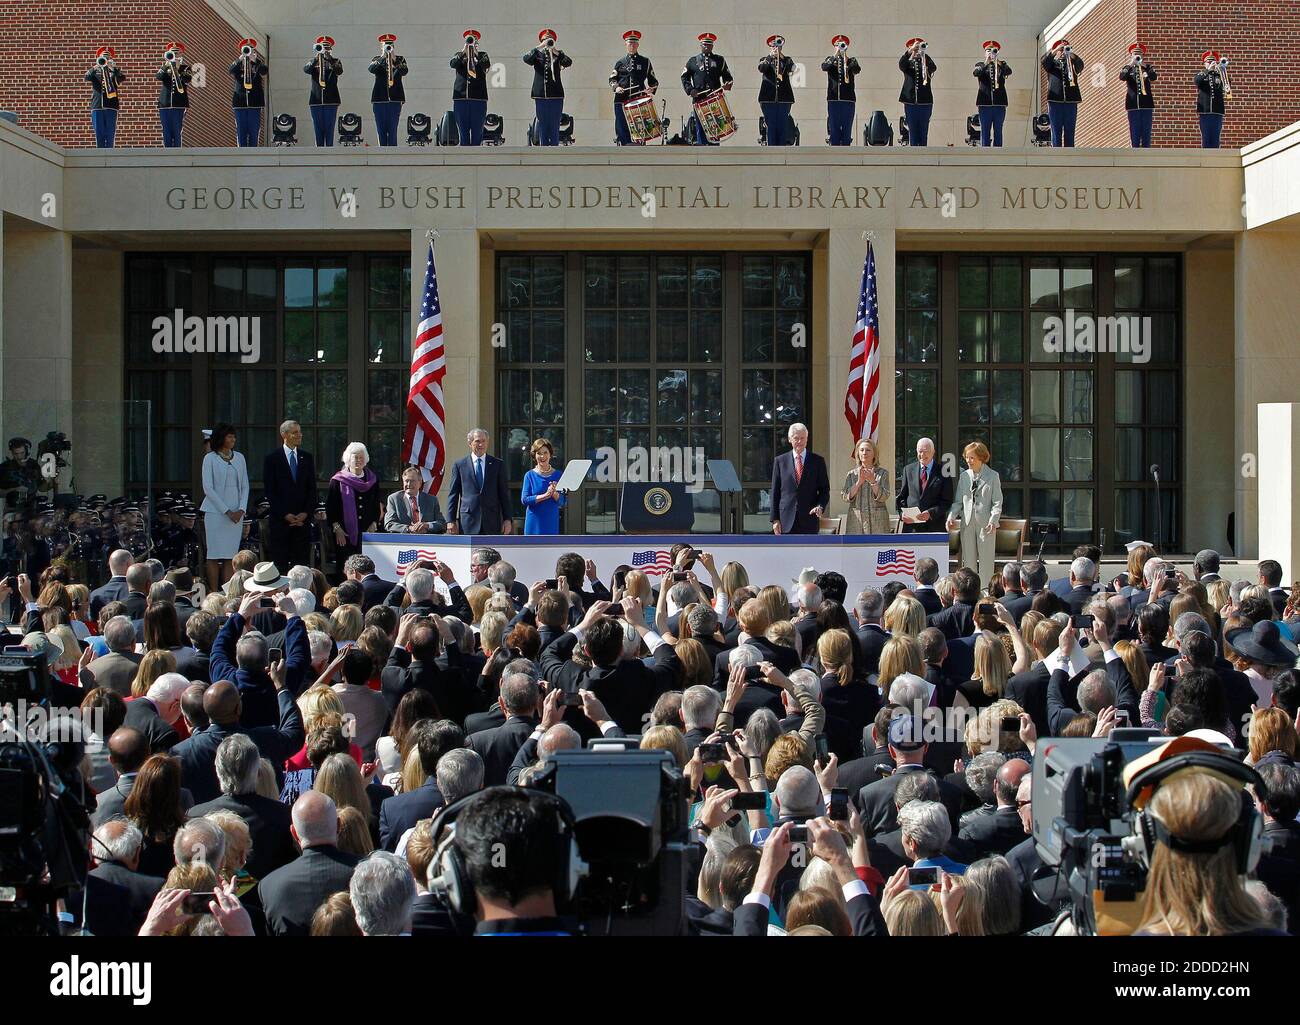 NO FILM, NO VIDEO, NO TV, NO DOCUMENTARY - The five American presidents and their wives onstage, Michelle and Barack Obama, Barbara and George H.W. Bush, George W. Bush and Laura Bush, Bill and Hillary Clinton and Jimmy and Rosalynn Carter as dedication ceremonies take place for the new George W. Bush Presidential Center in Dallas, Texas, USA, Thursday, April 25, 2013. Photo by Paul Moseley/Fort Worth Star-Telegram/MCT/ABACAPRESSS.COM Stock Photo